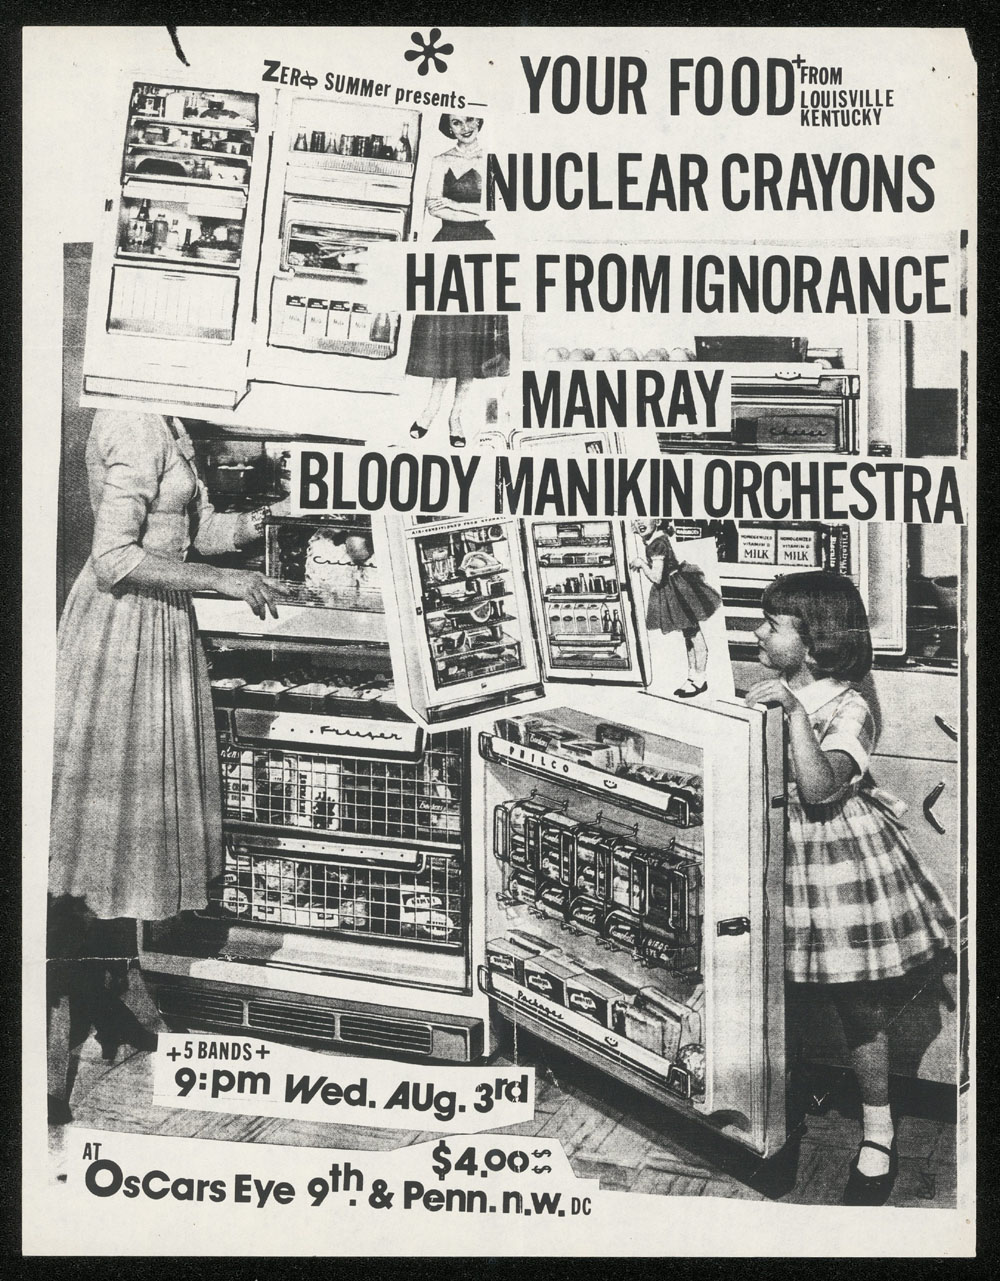 YOUR FOOD w/ Nuclear Crayons, Hate From Ignorance, Manray, Bloody Manikin Orchestra at Oscar's Eye